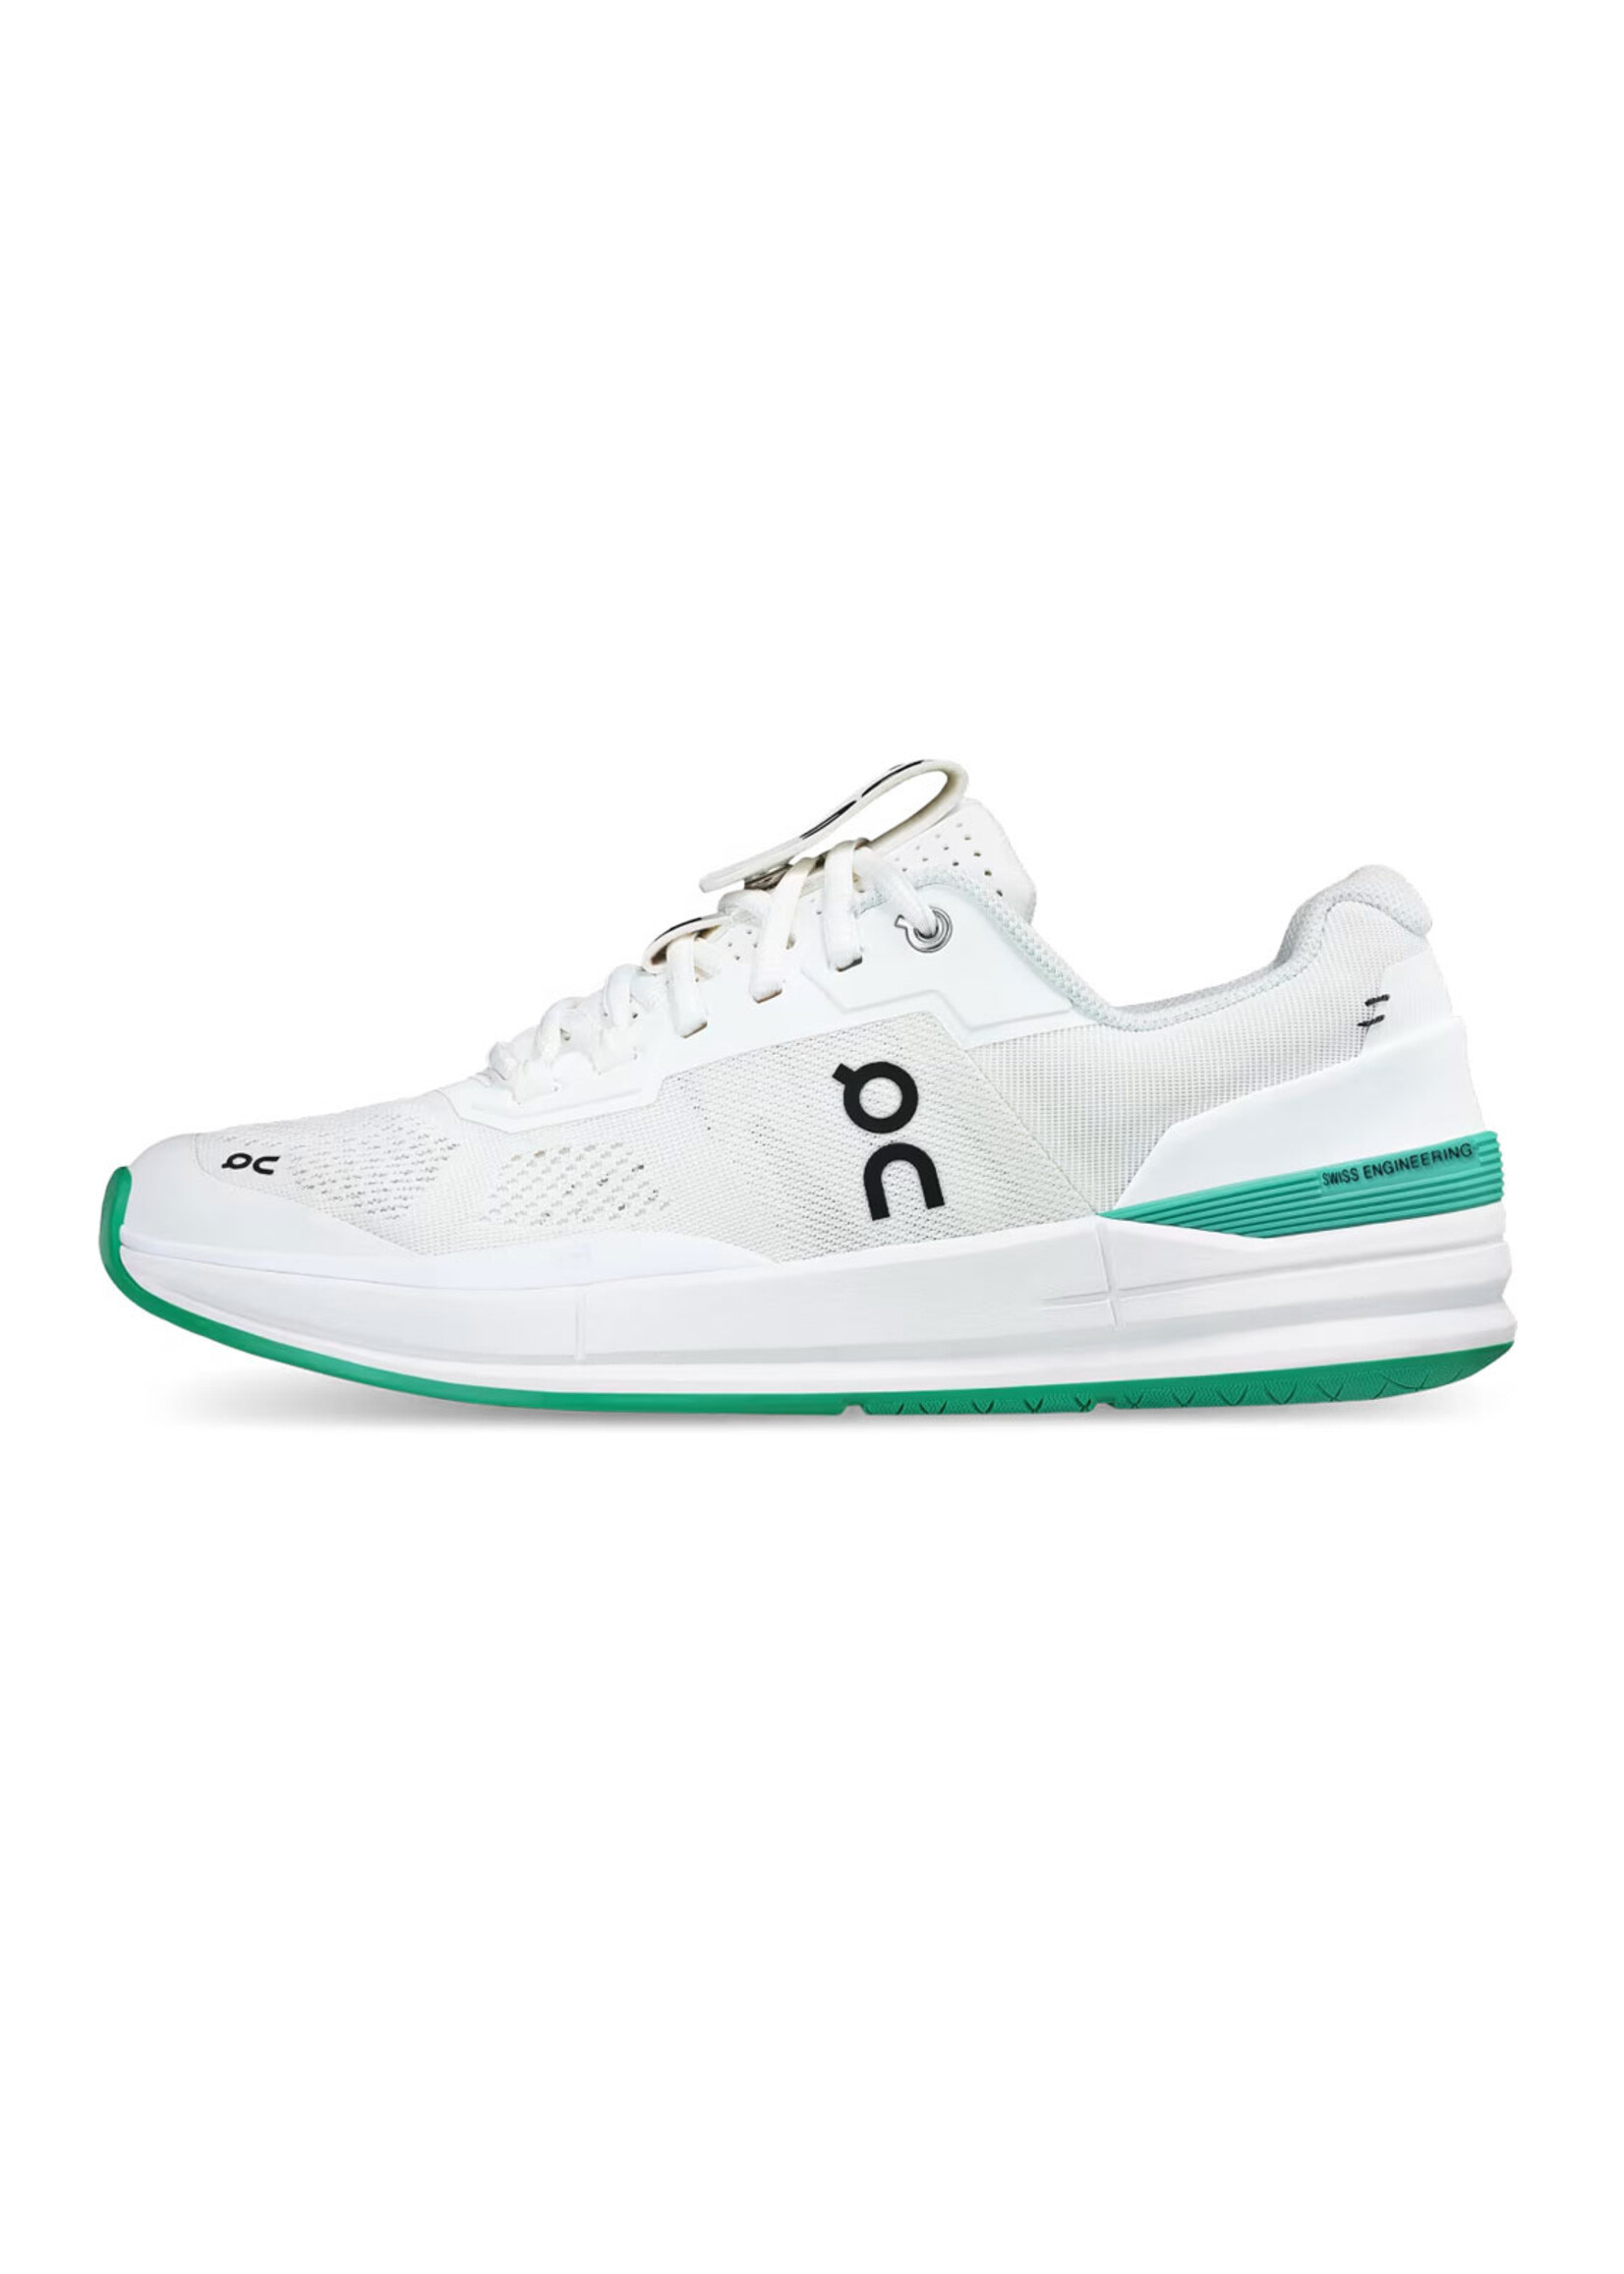 ON On The Roger Pro  Women's Tennis Shoes